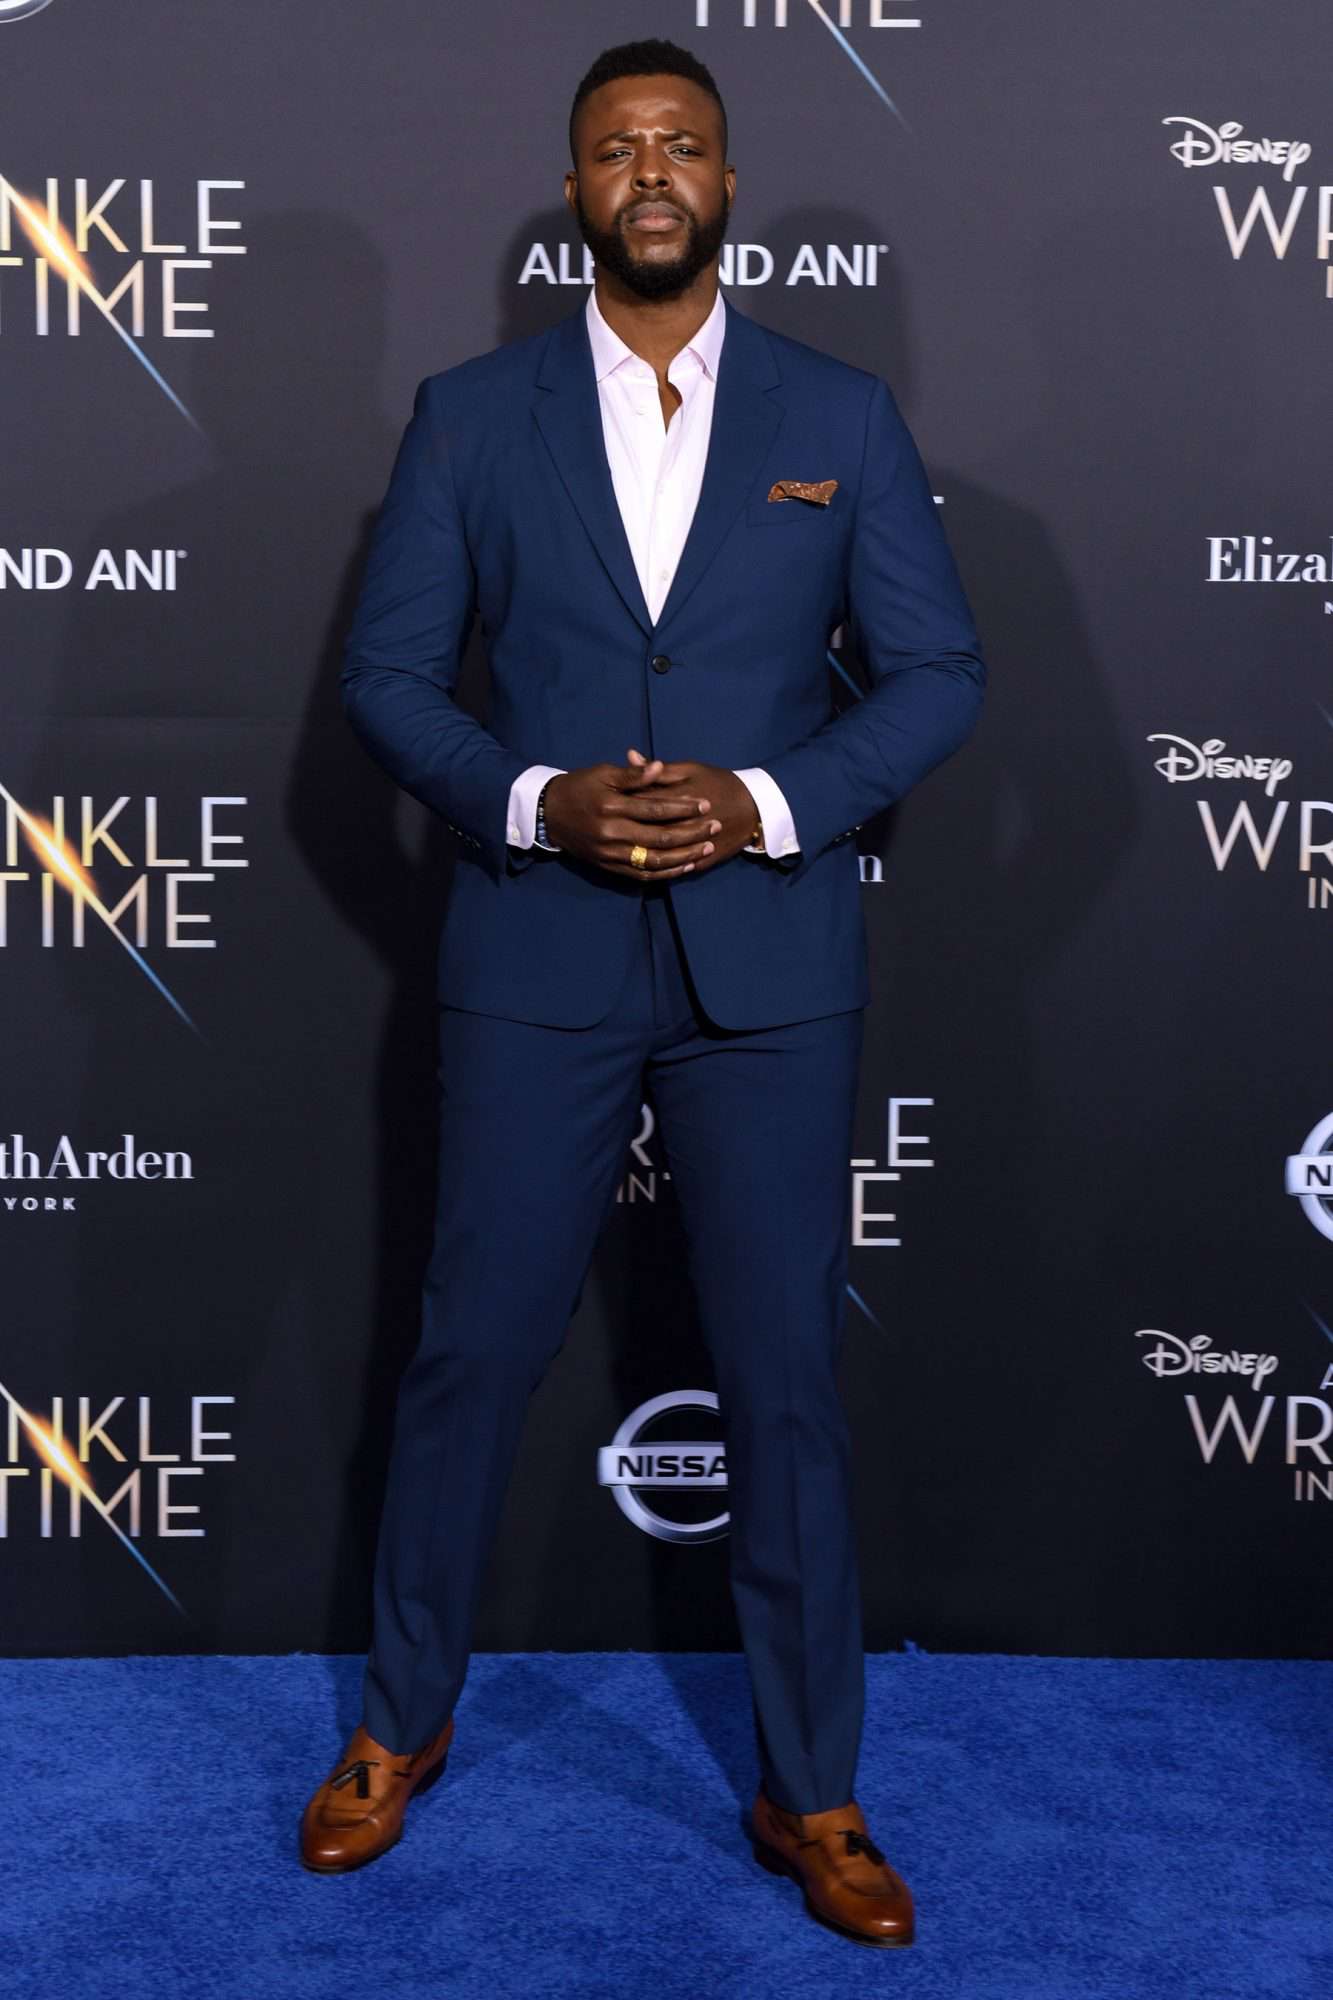 Premiere Of Disney's "A Wrinkle In Time" - Arrivals